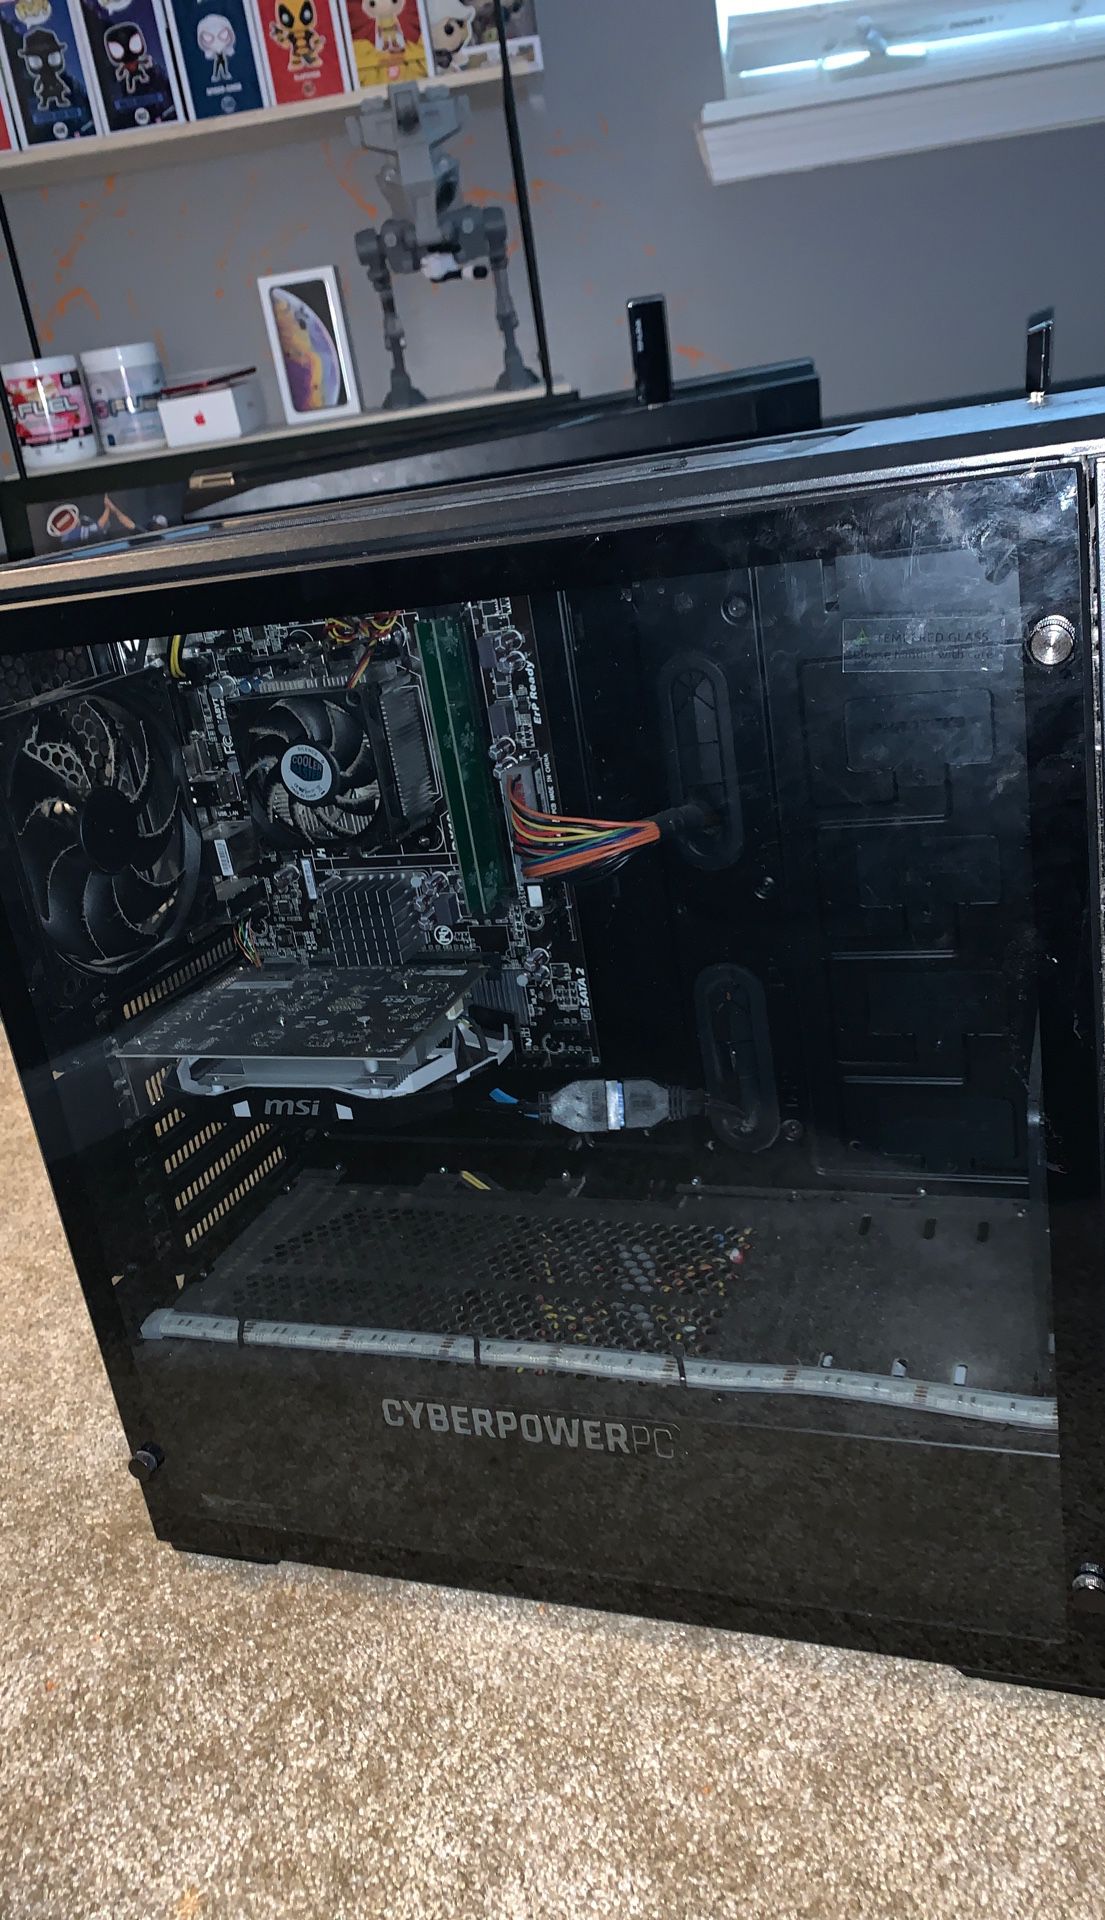 Cyber power Pc and monitor